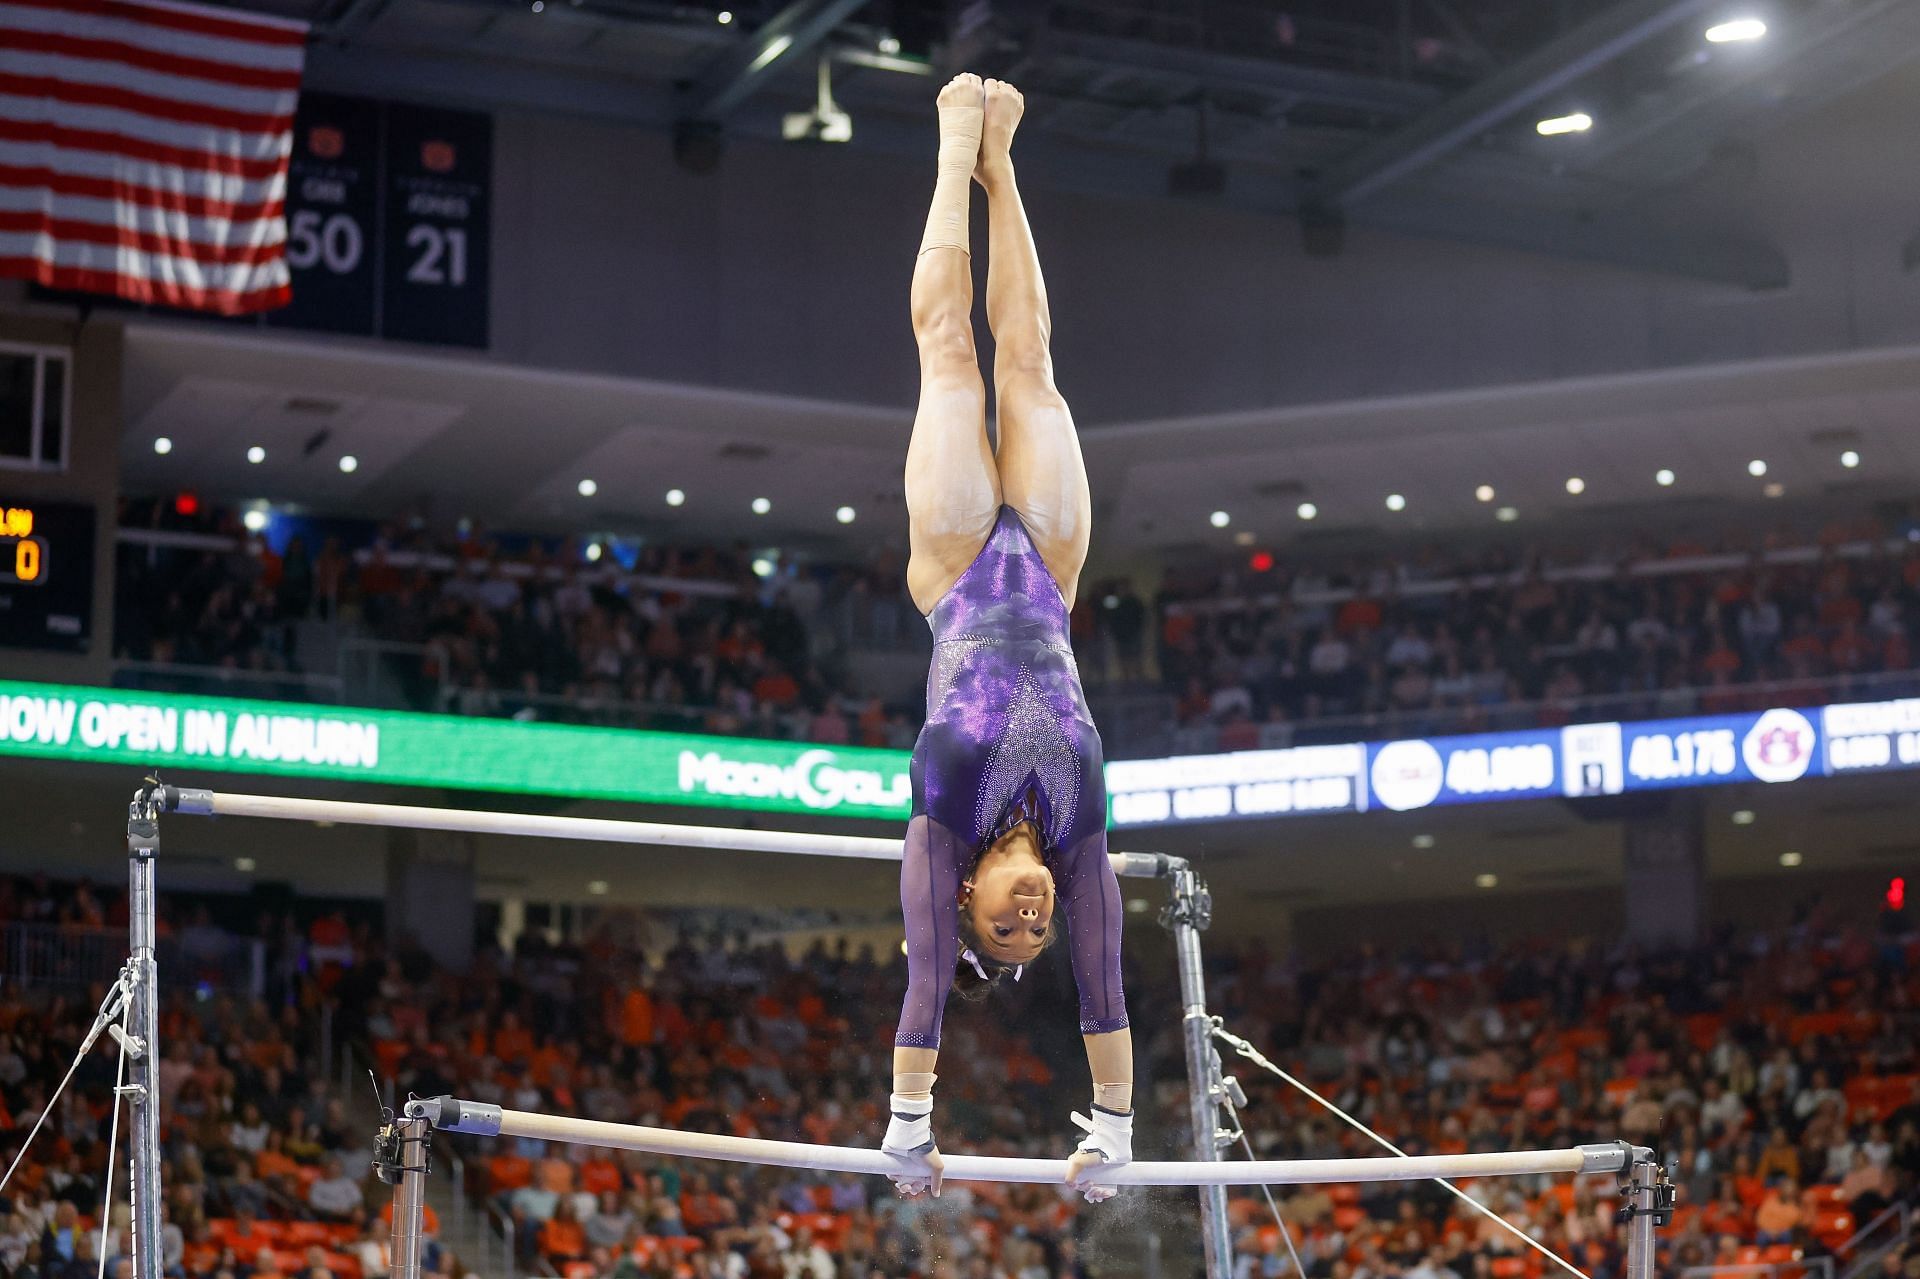 The LSU Tigers secured a victory over Georgia, led by all-around senior Haleigh Bryant.